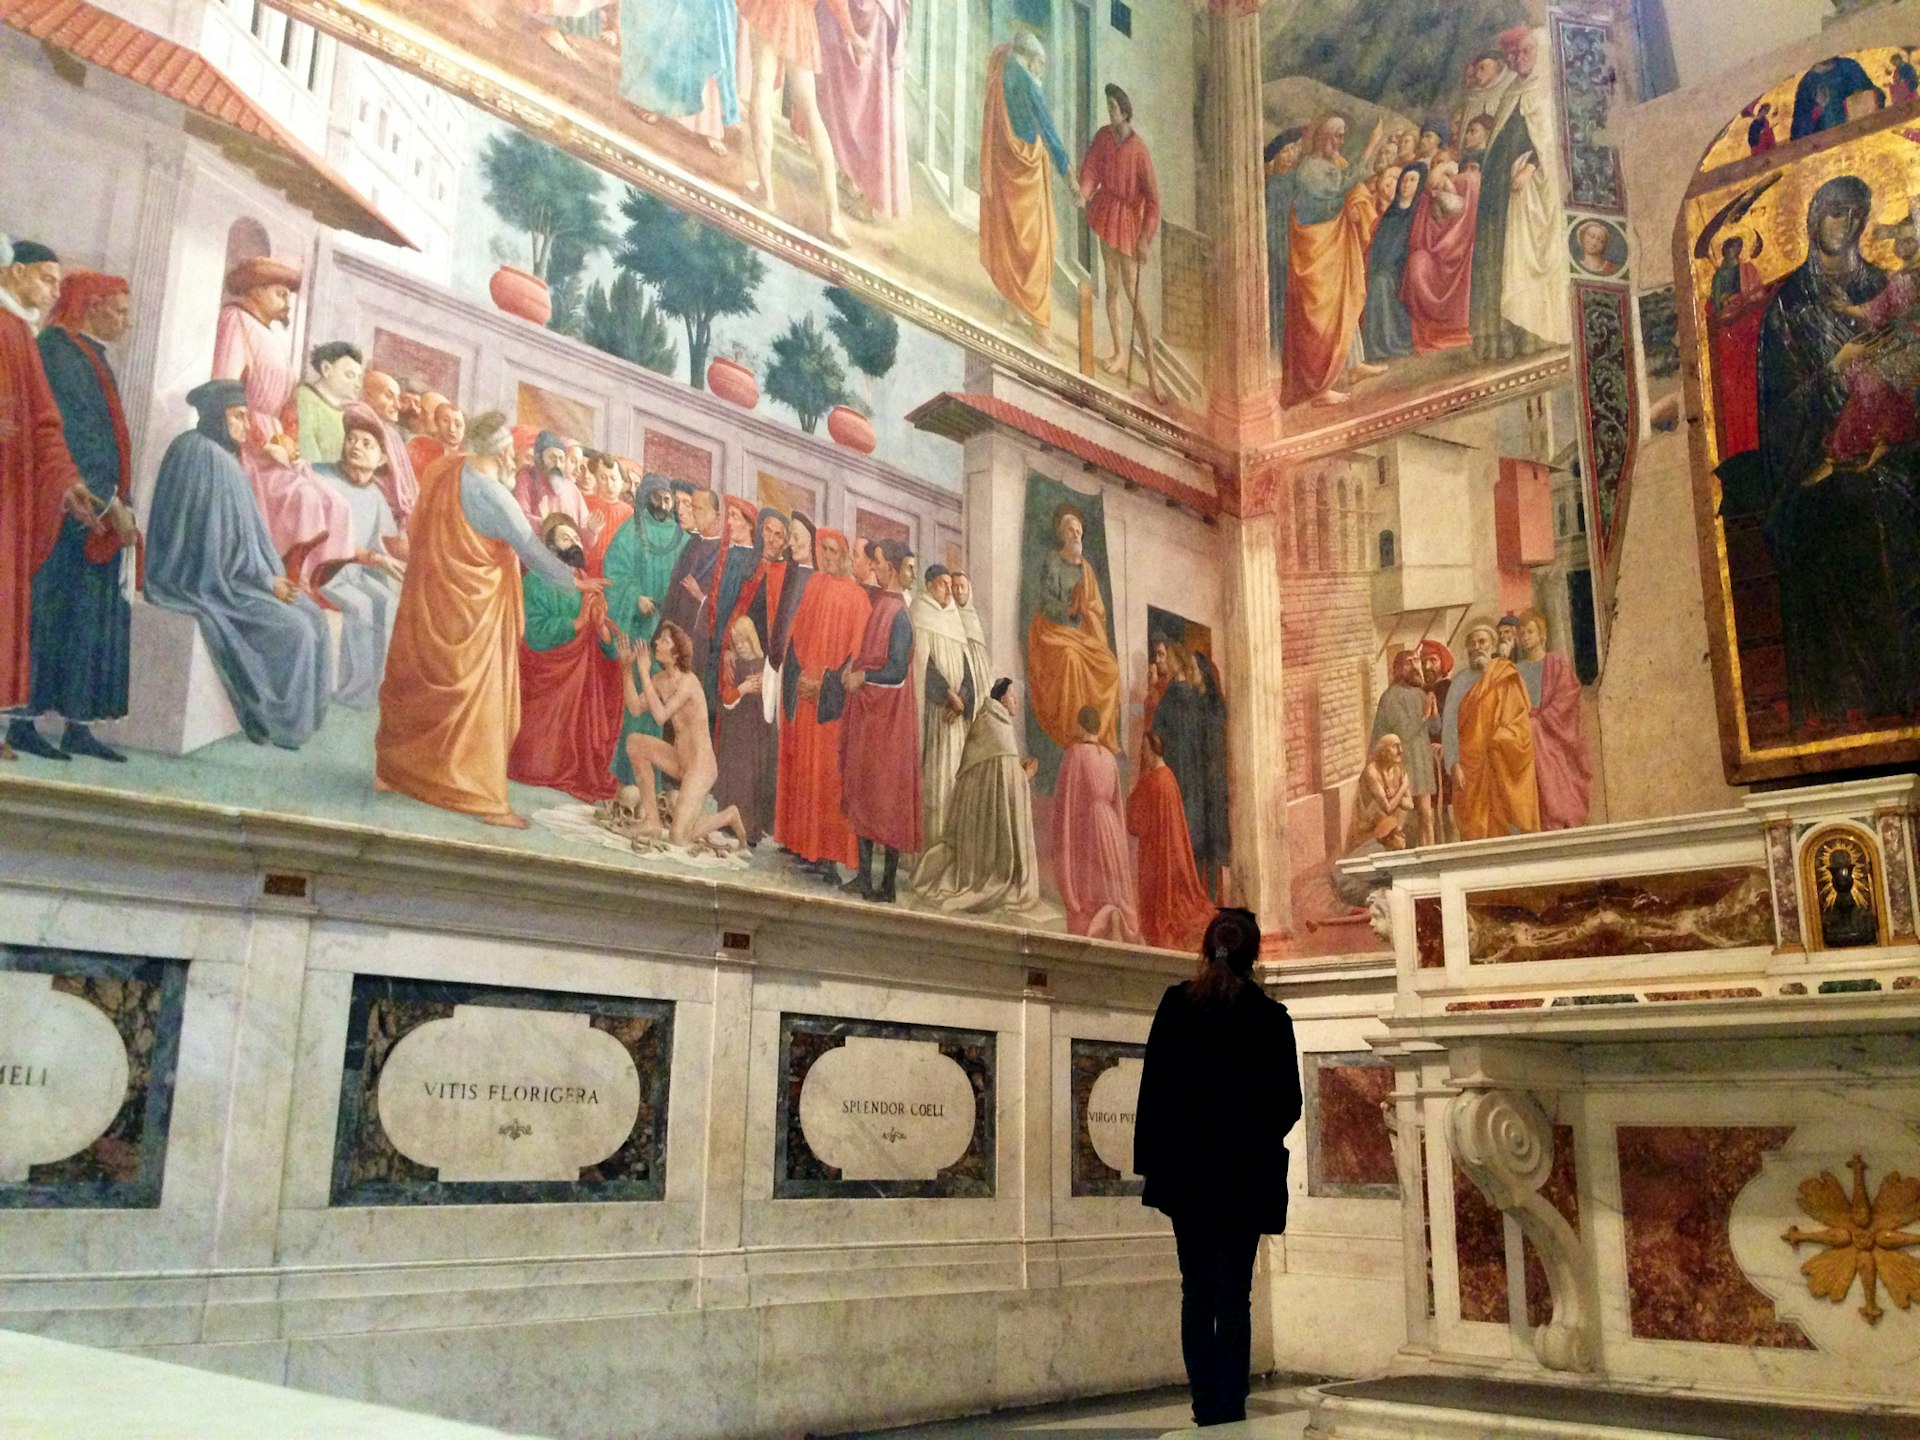 The frescoes XXXX. Image by Nicola Williams / Lonely Planet